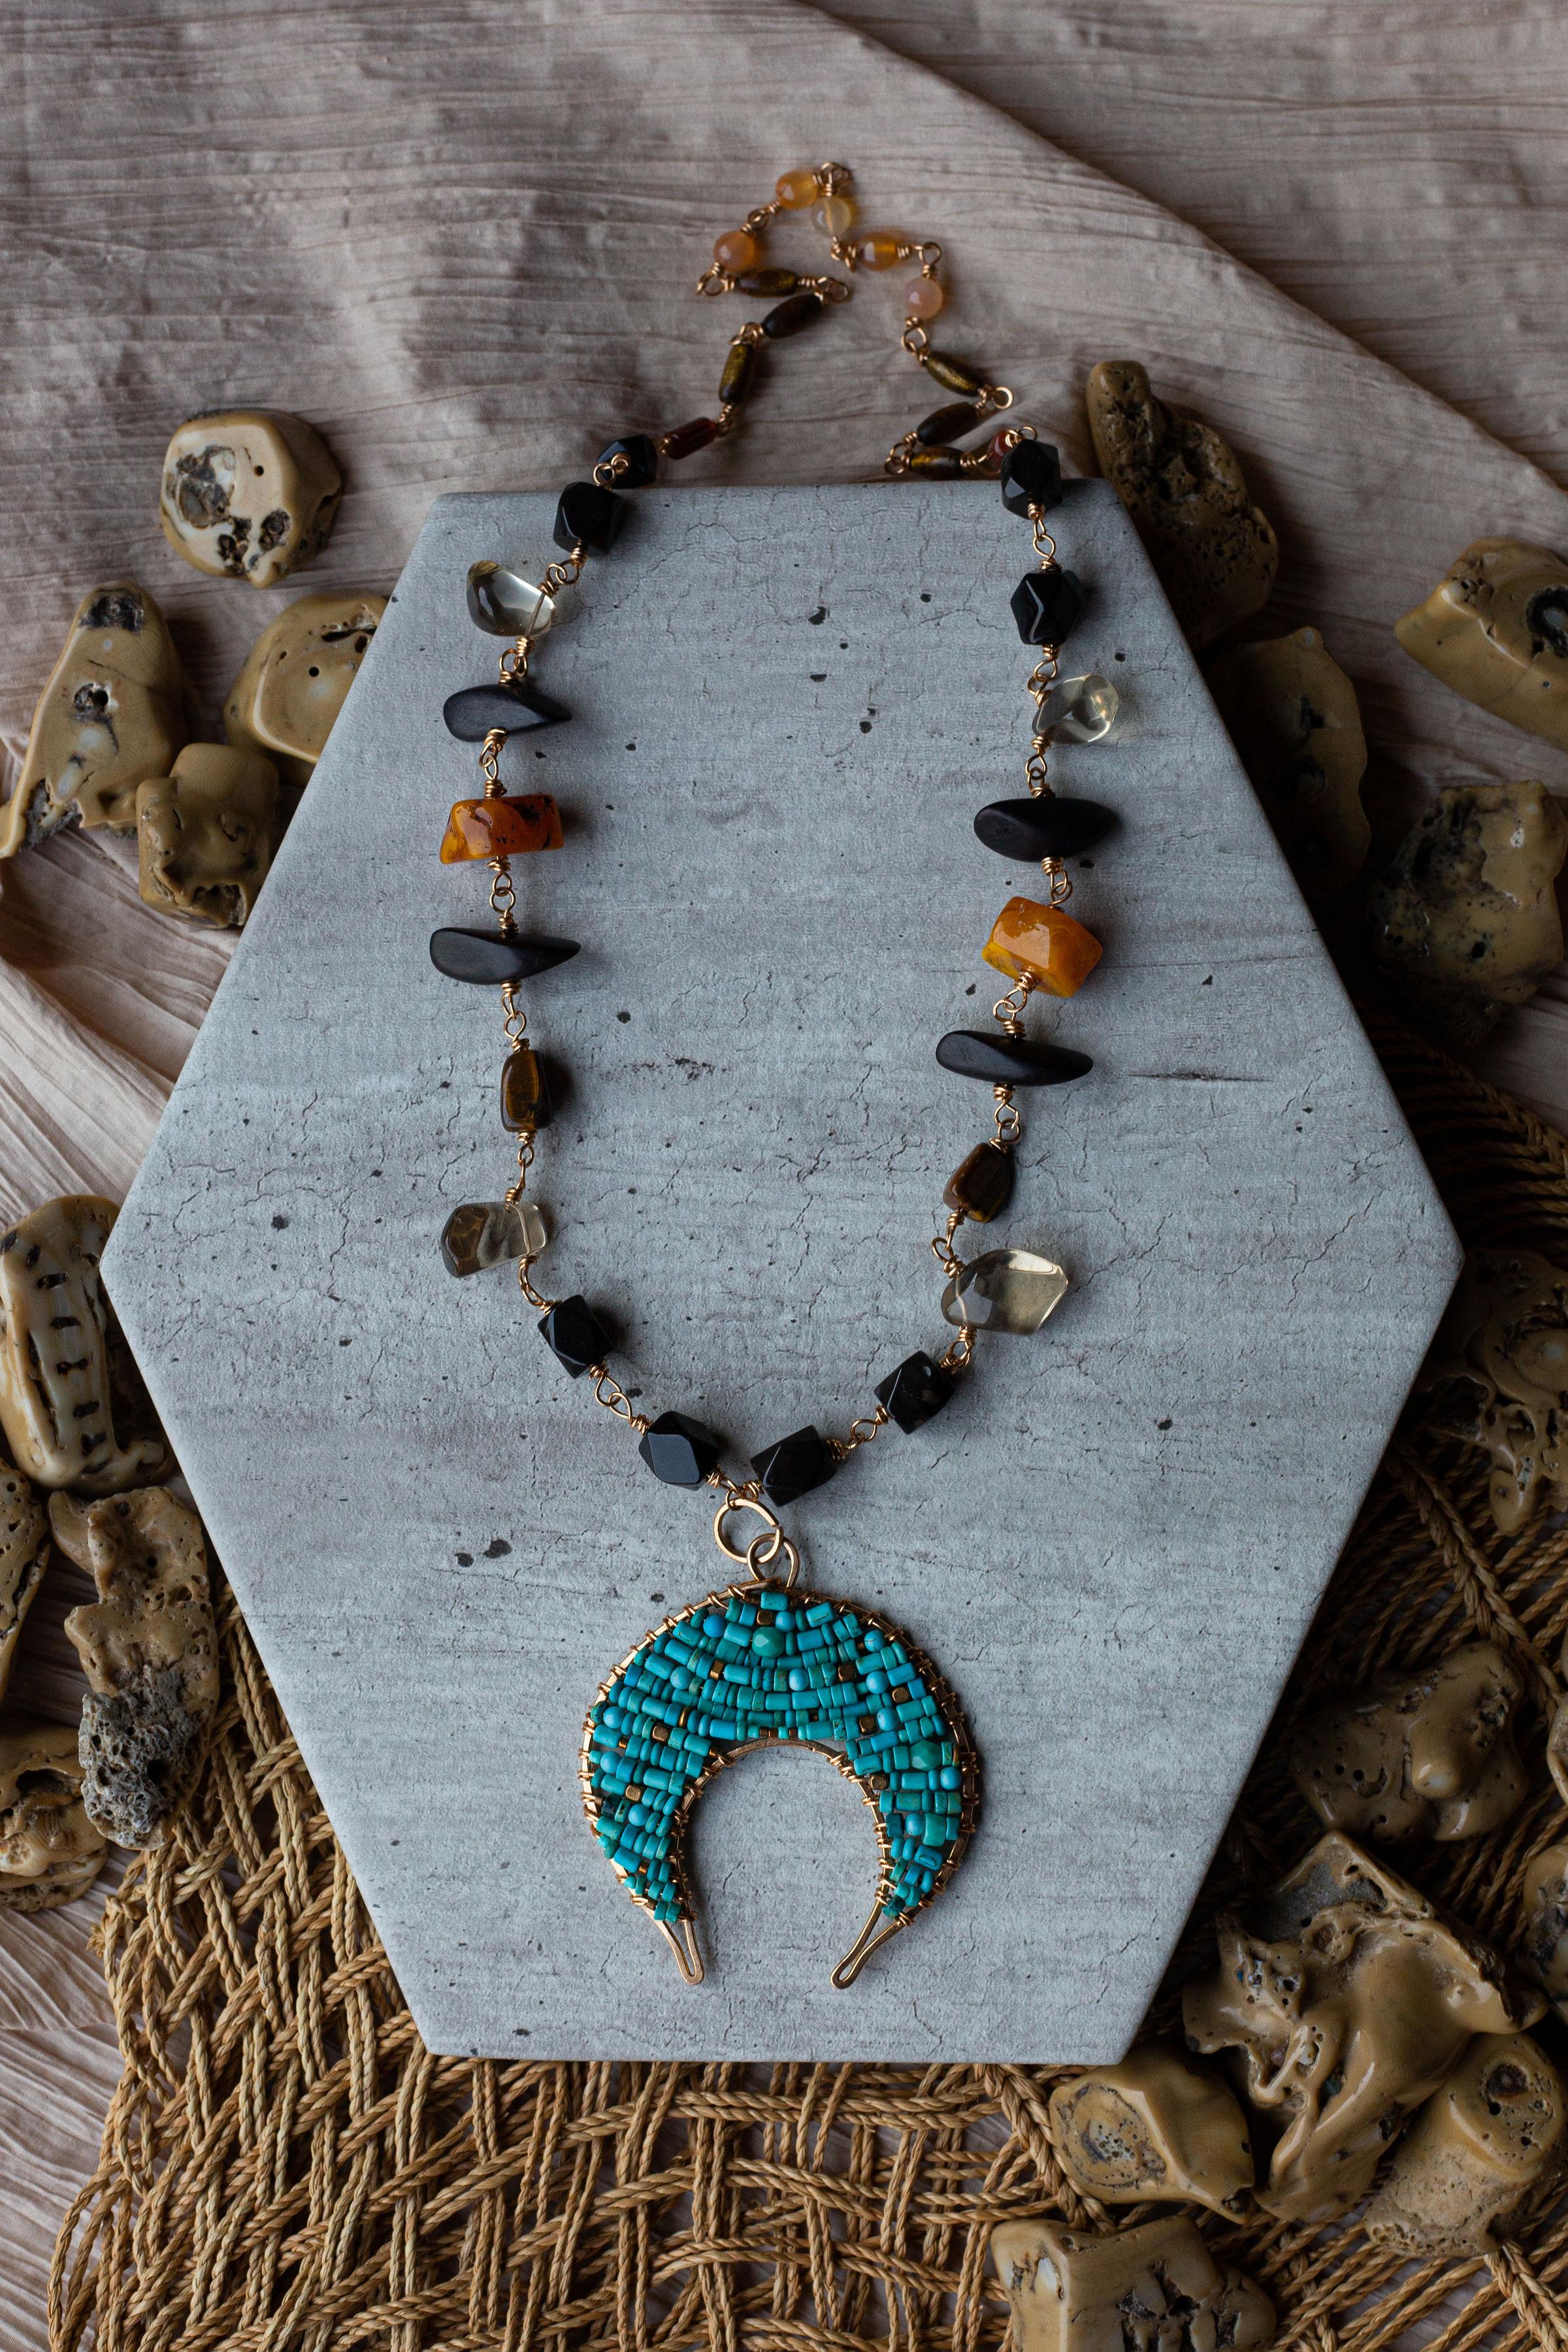 A show stopping artisan crafted piece of genuine jeweler’s brass, various turquoise beads, smokey quartz, black onyx, dark wood, carnelian, tigers eye and vintage butterscotch amber. 18” in overall length, pendant is approximately 3 x 3 inches.